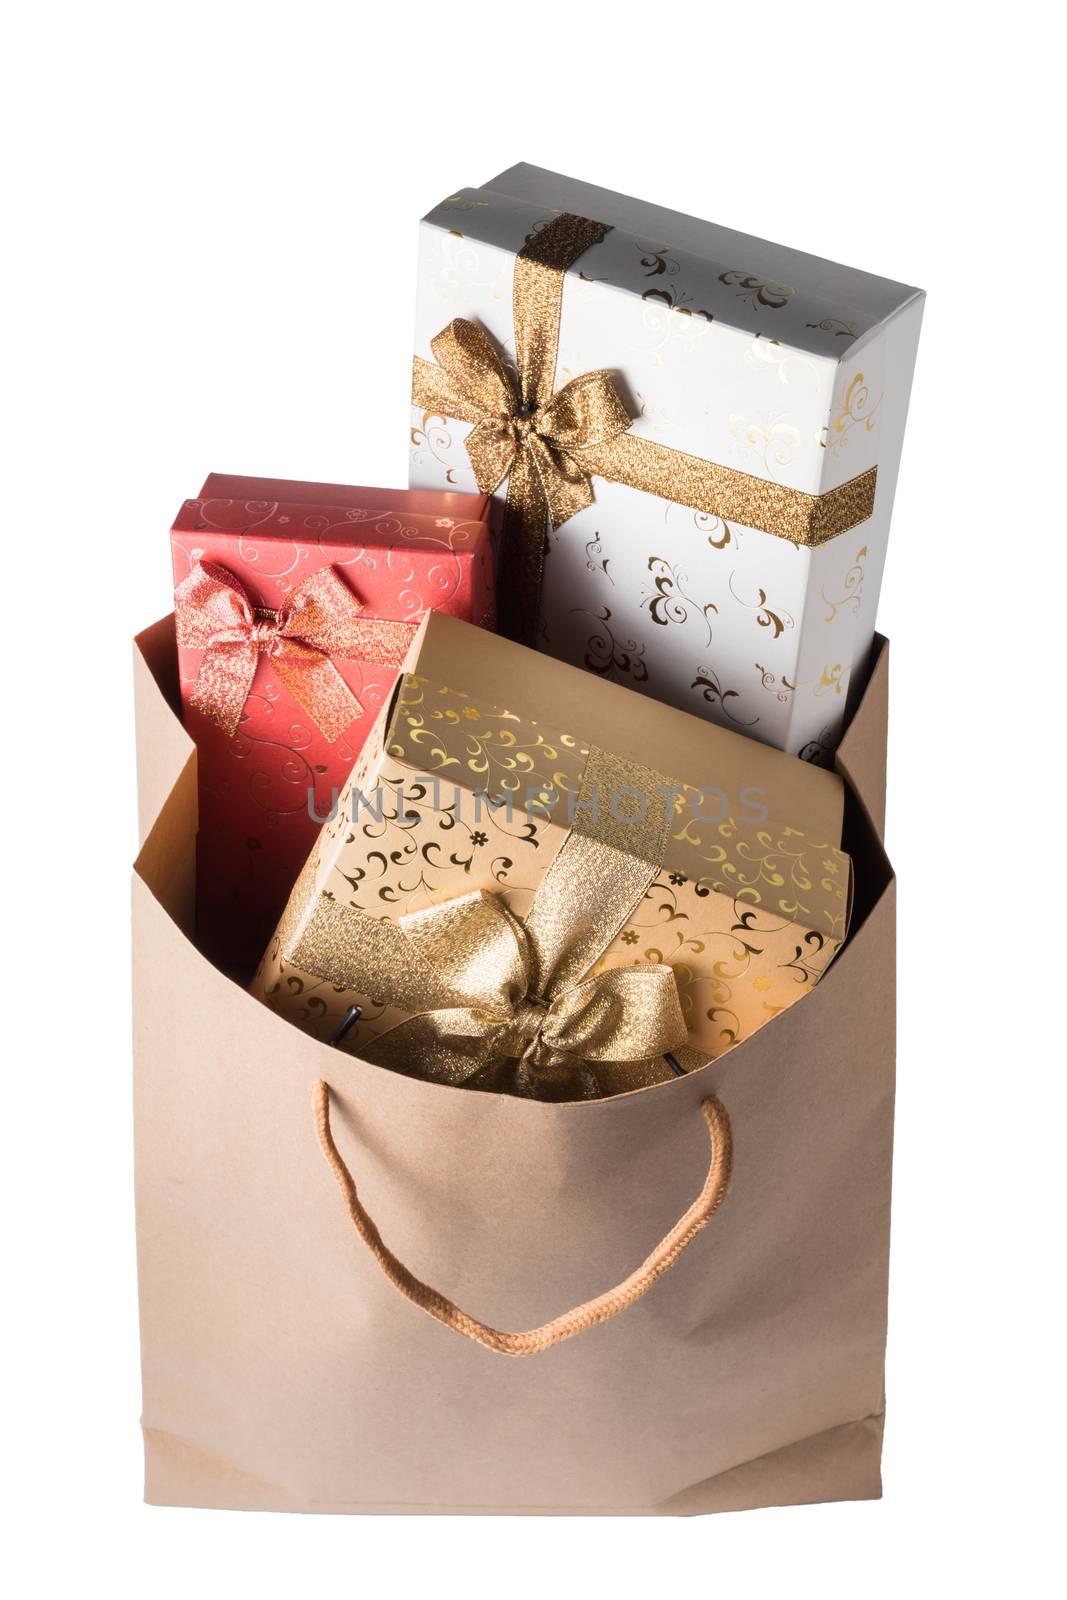 Gift boxes in brown paper bag on white background.